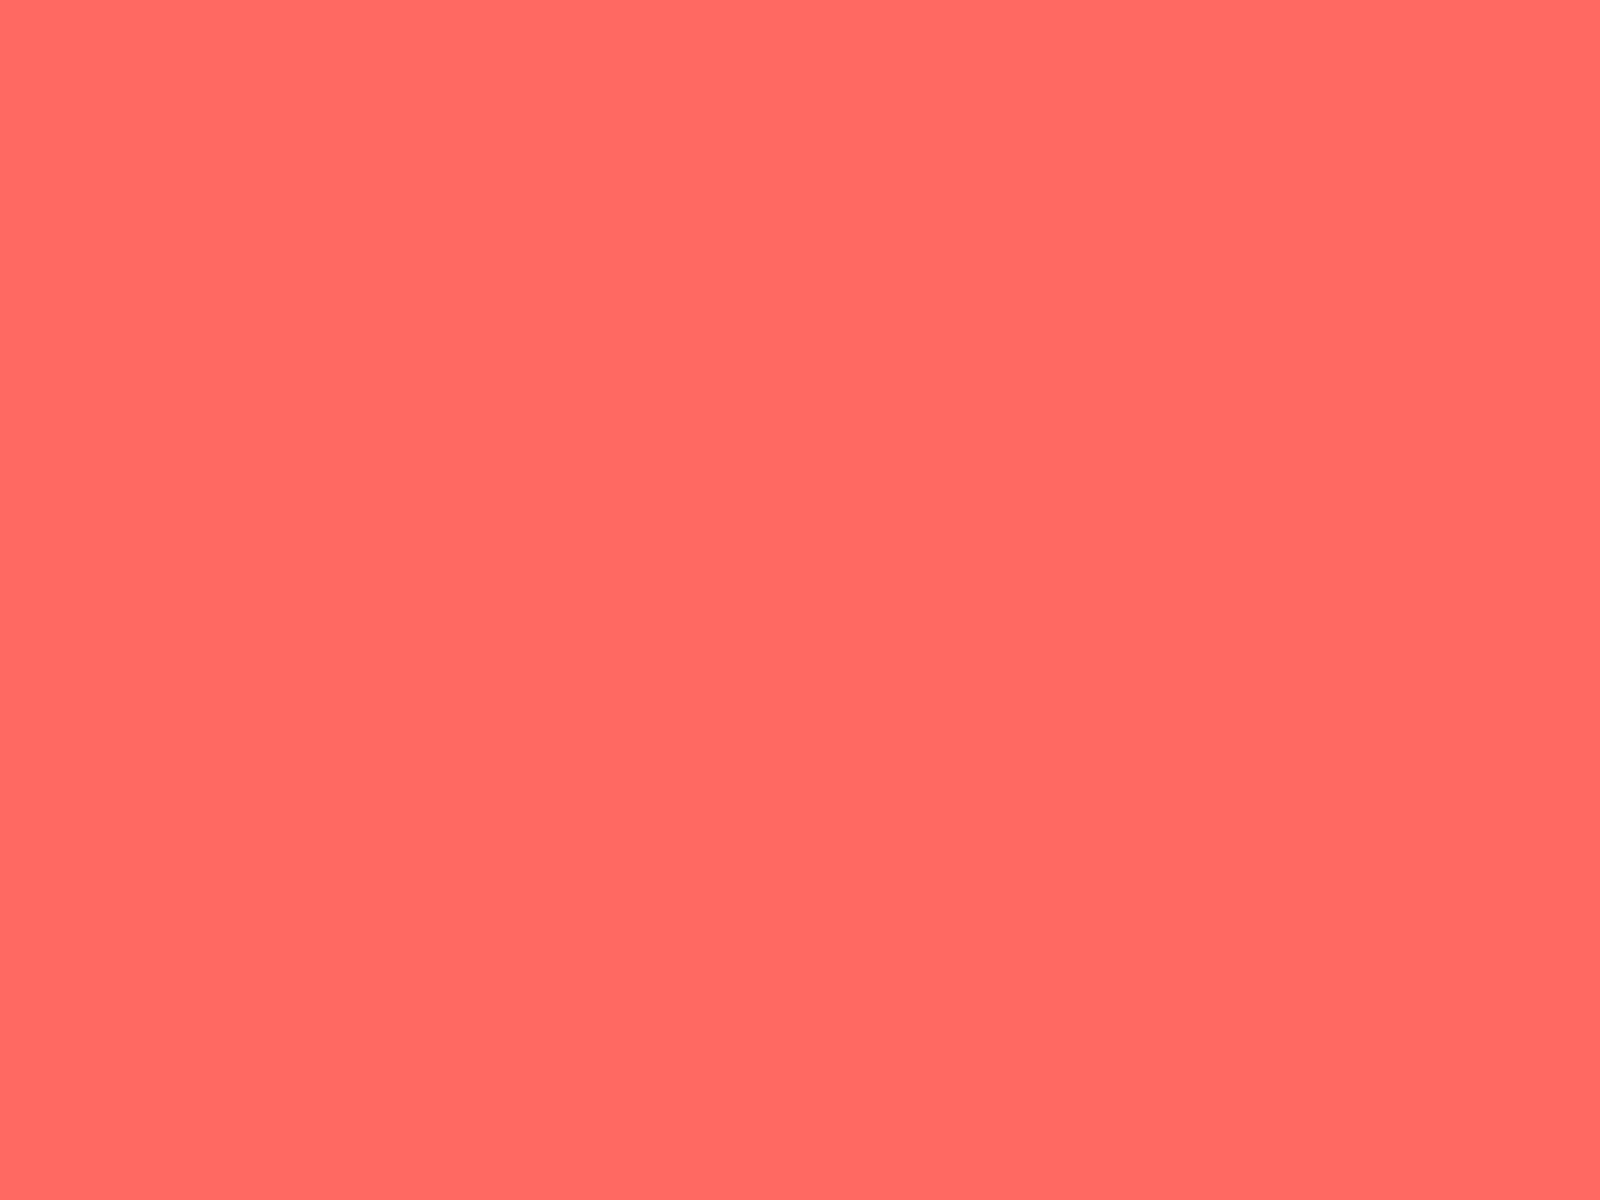 Free 1600x1200 resolution Pastel Red solid color background view and